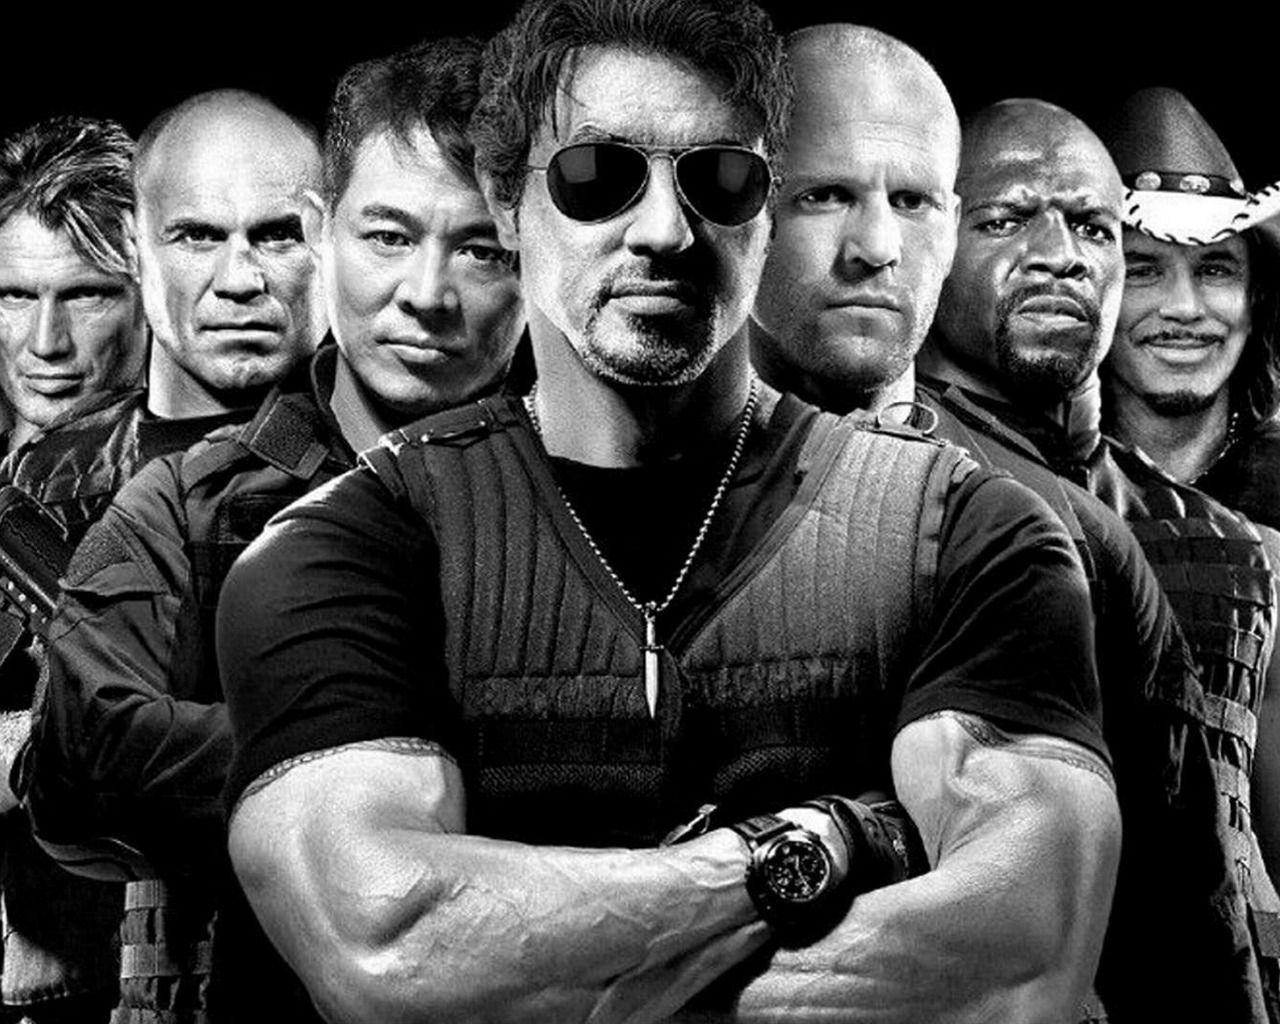 The Expendables Movie Wallpaper